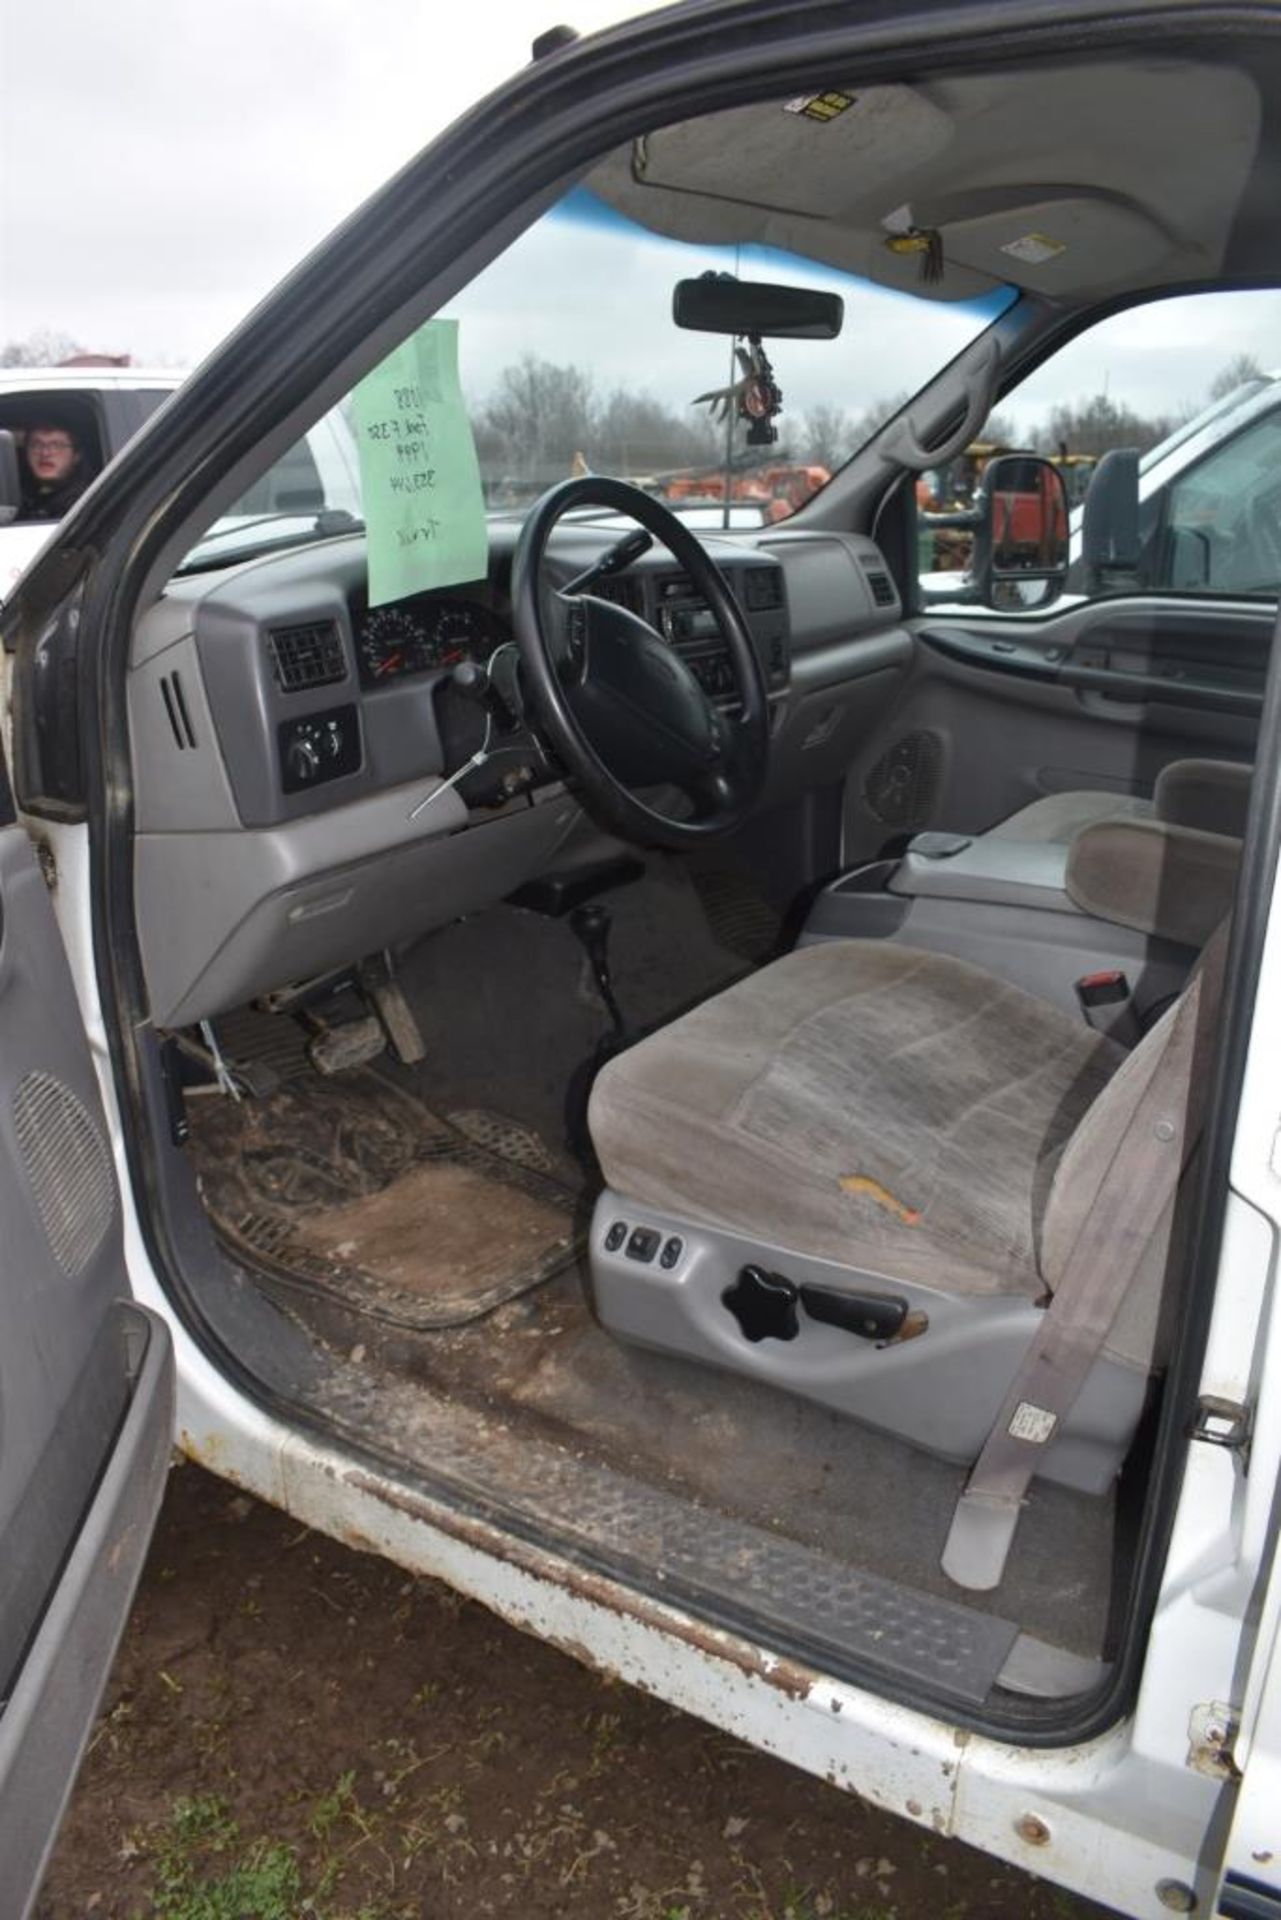 1999 Ford F-350 XLT Super Duty Truck - Image 34 of 38